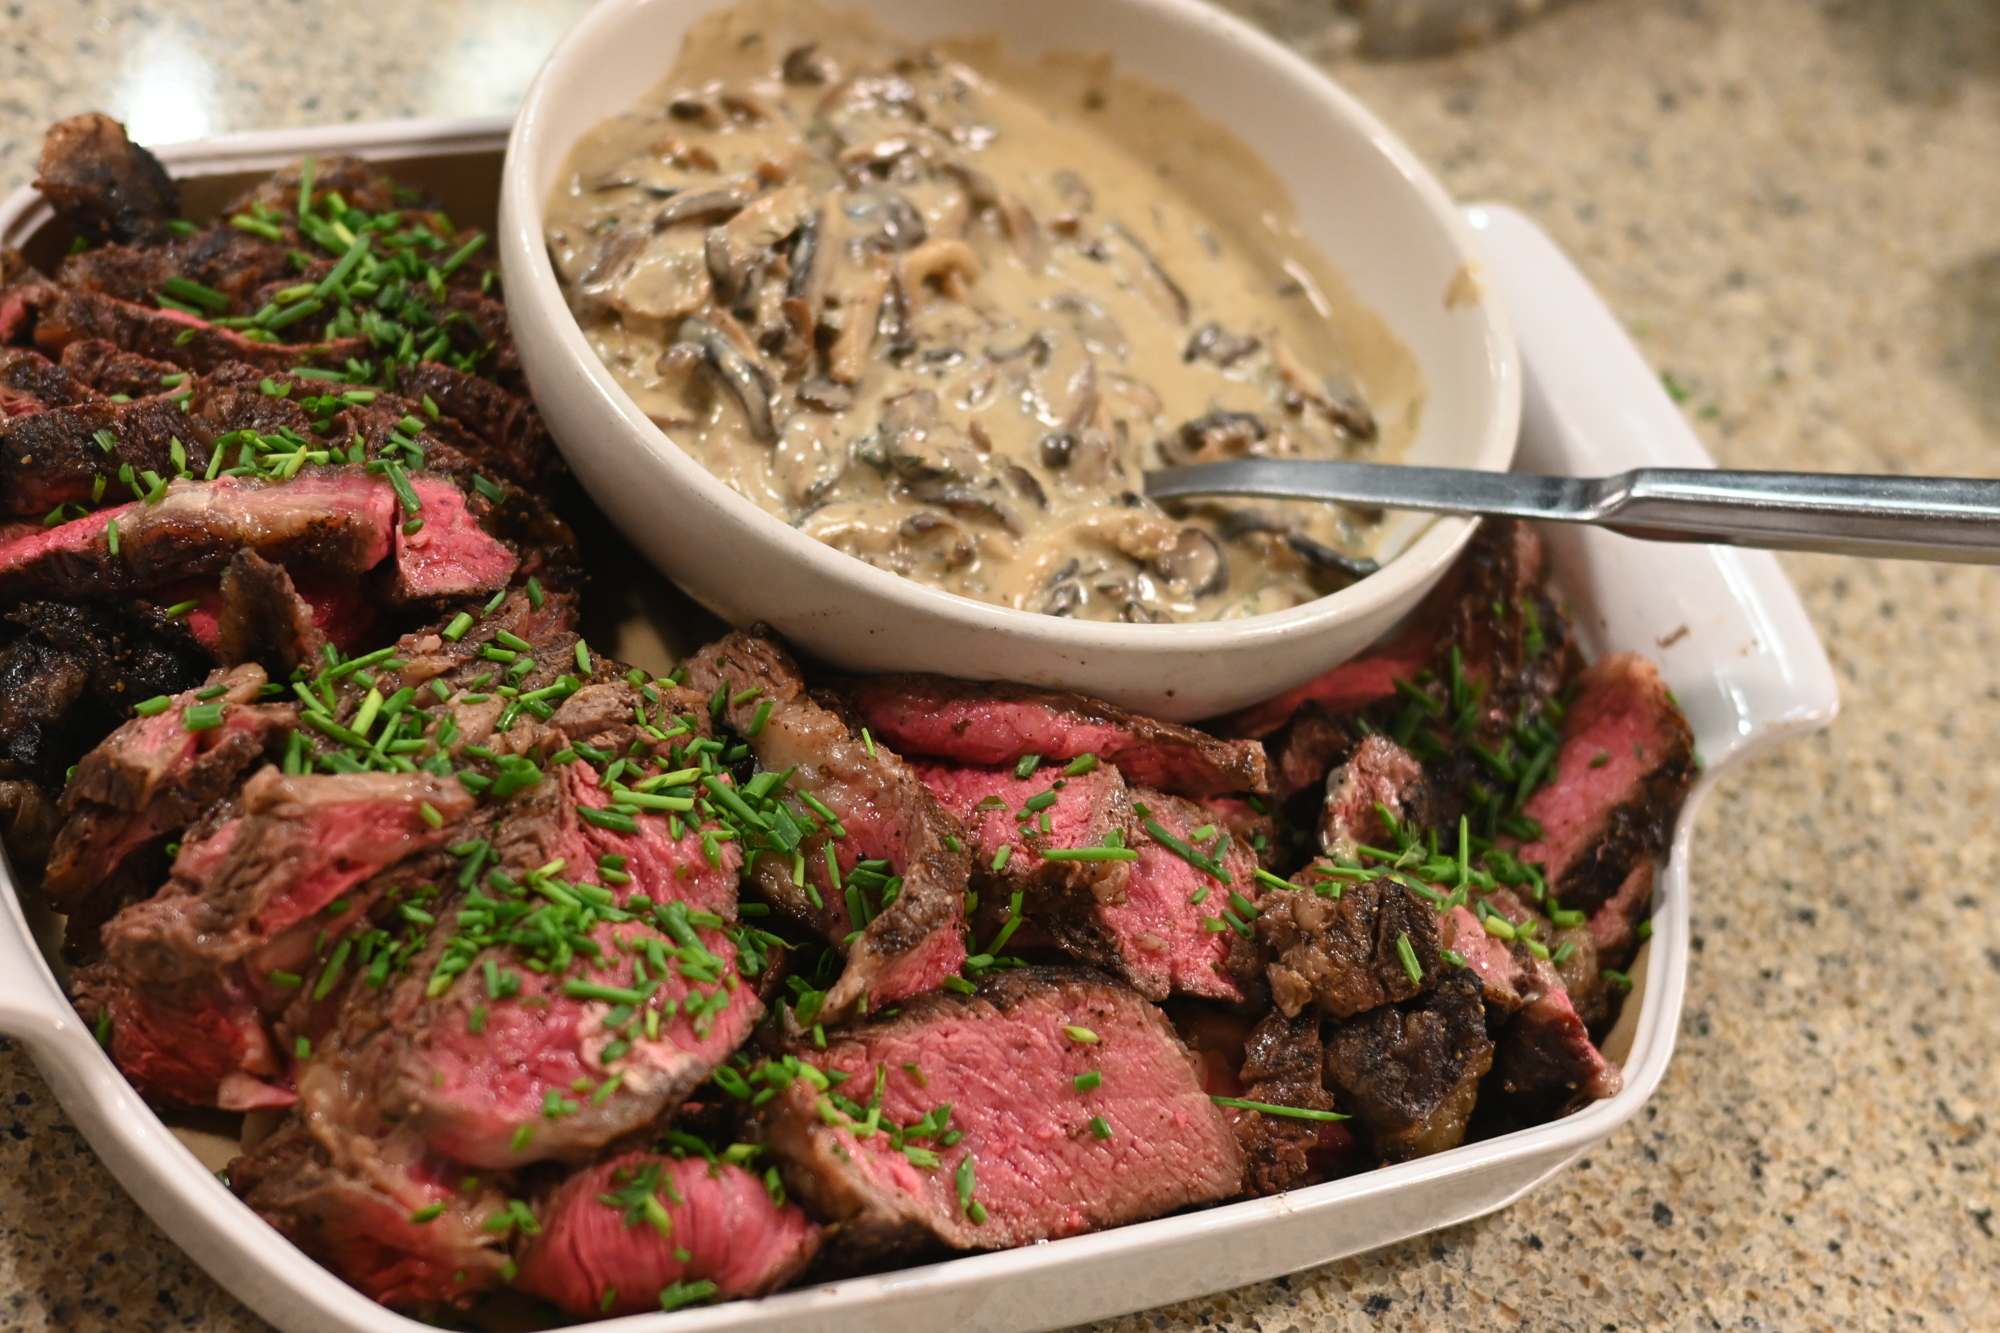 The finished product: Steak with creamy gorgonzola mushrooms. (Photo: Spencer Fordin)